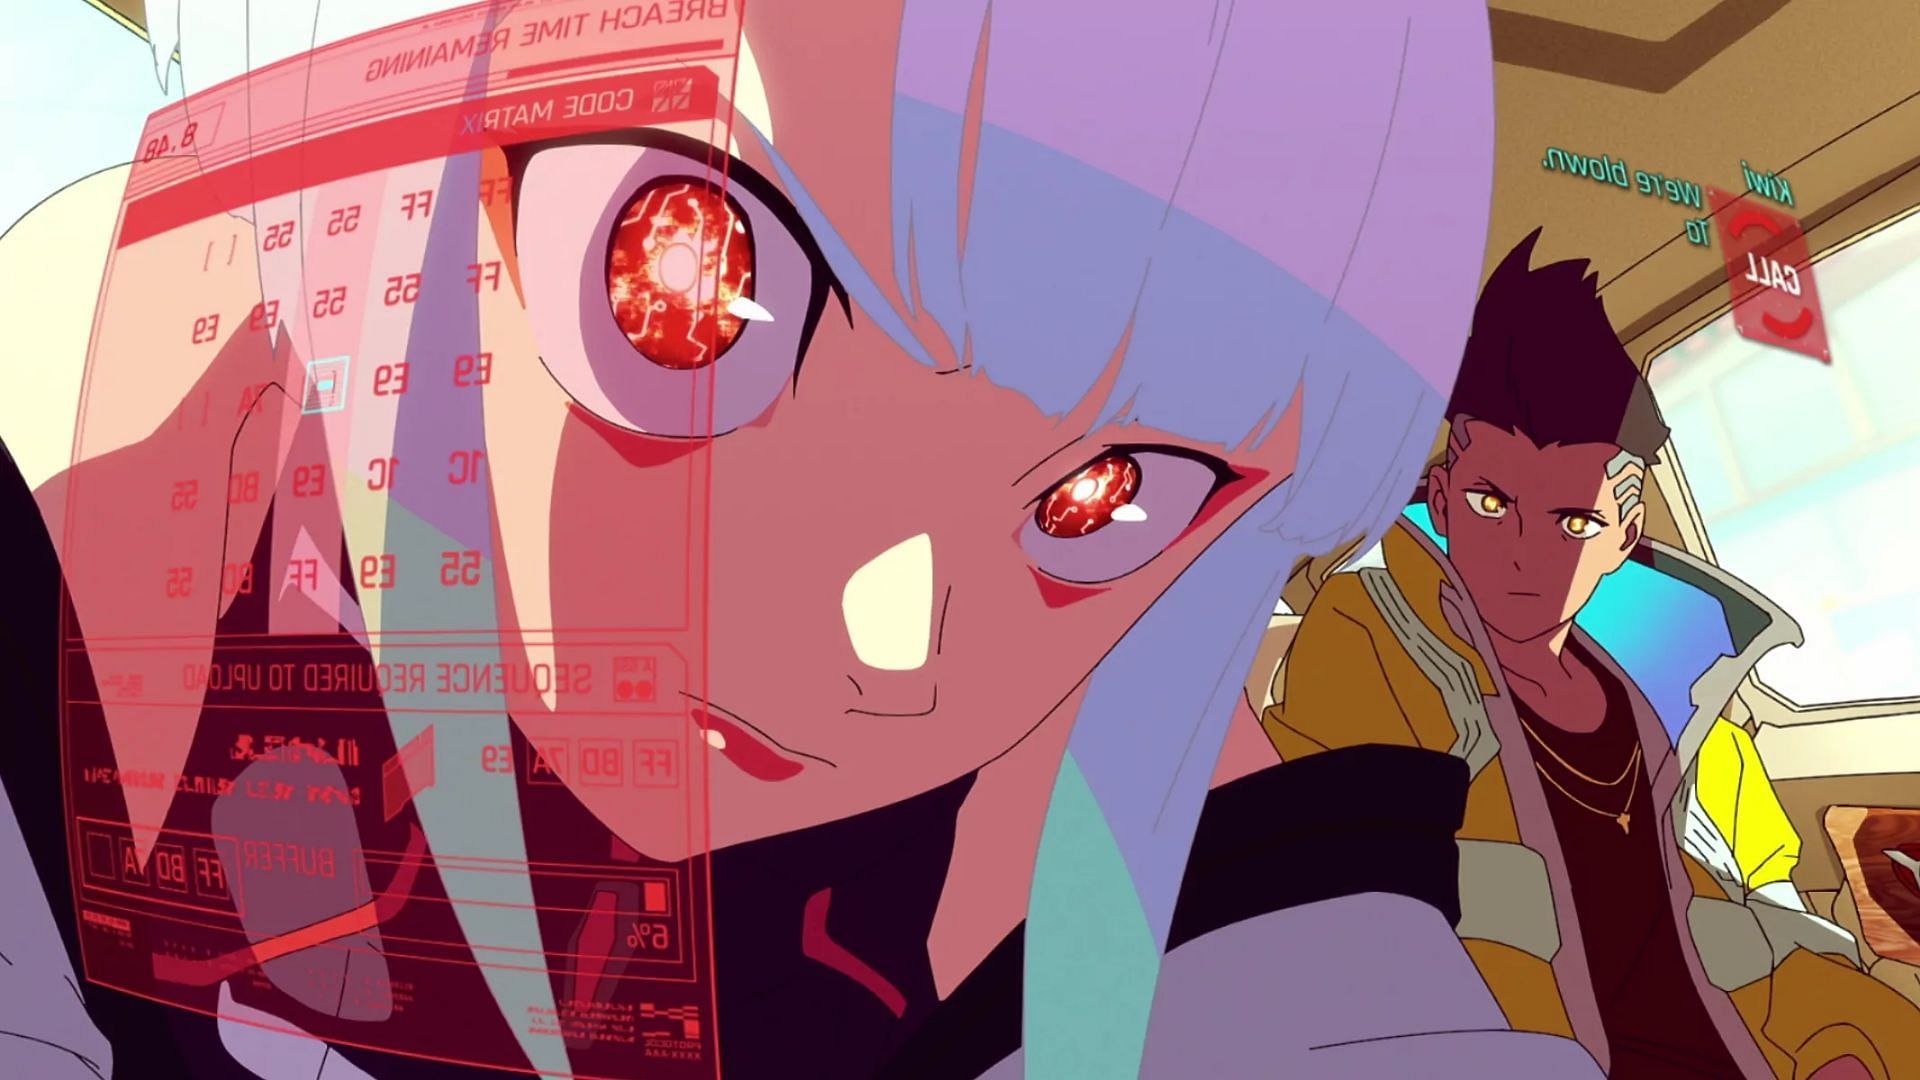 A screenshot from the anime